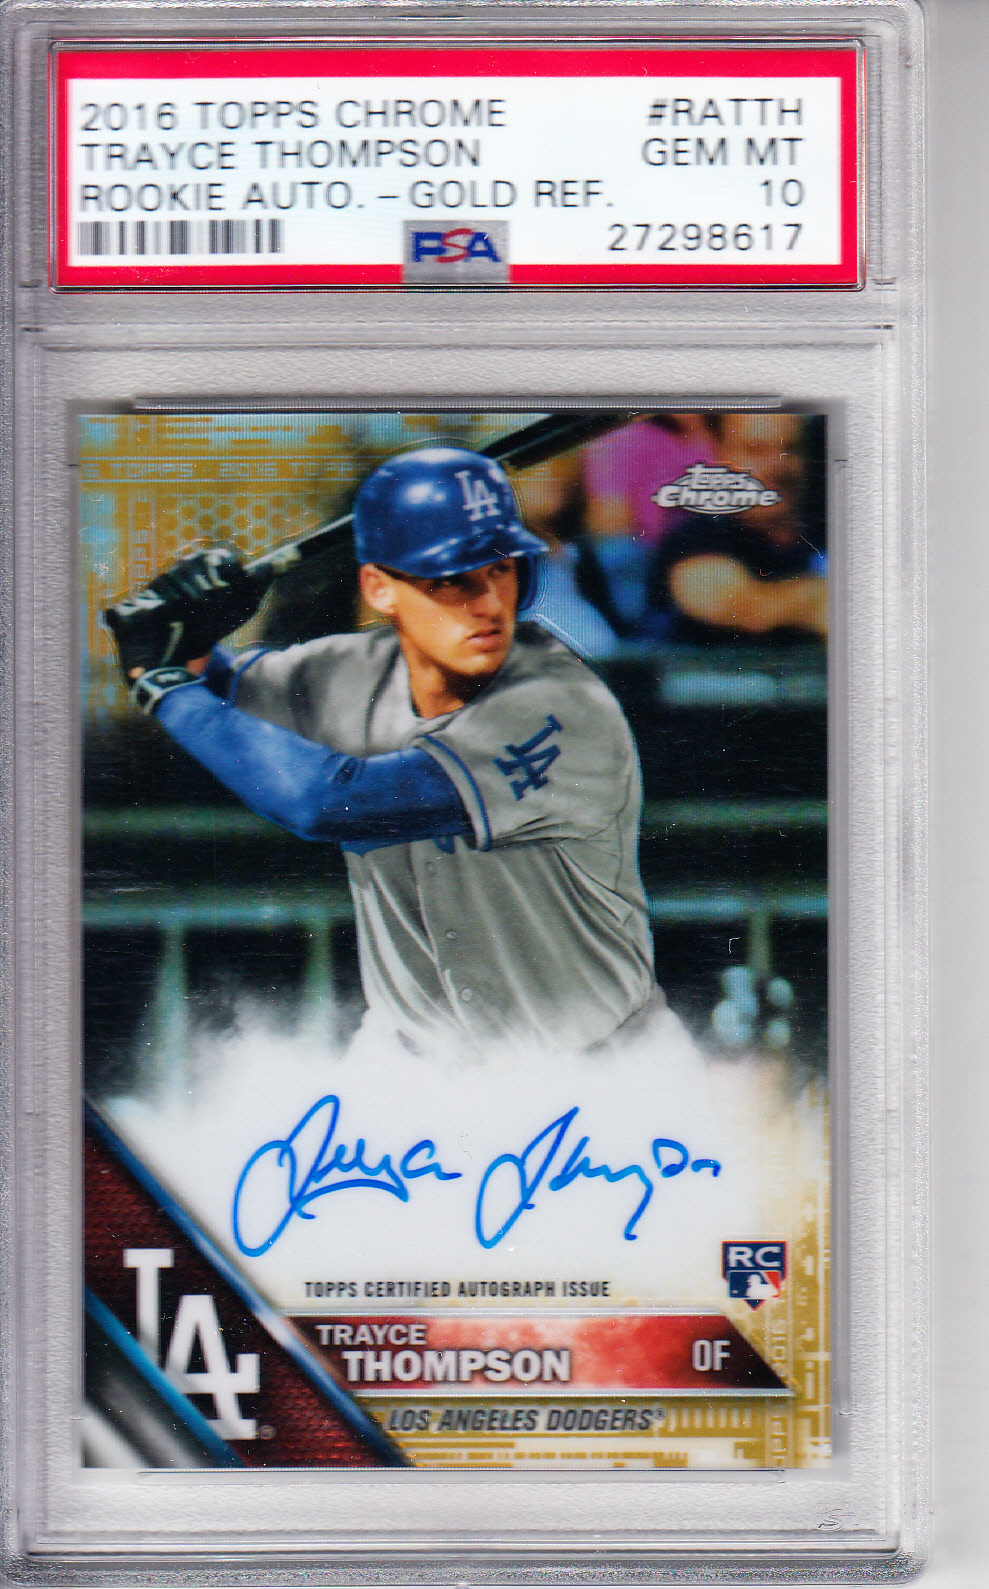 2016 Topps Chrome Rookie Autographs Gold Refractors #RATTH Trayce Thompson